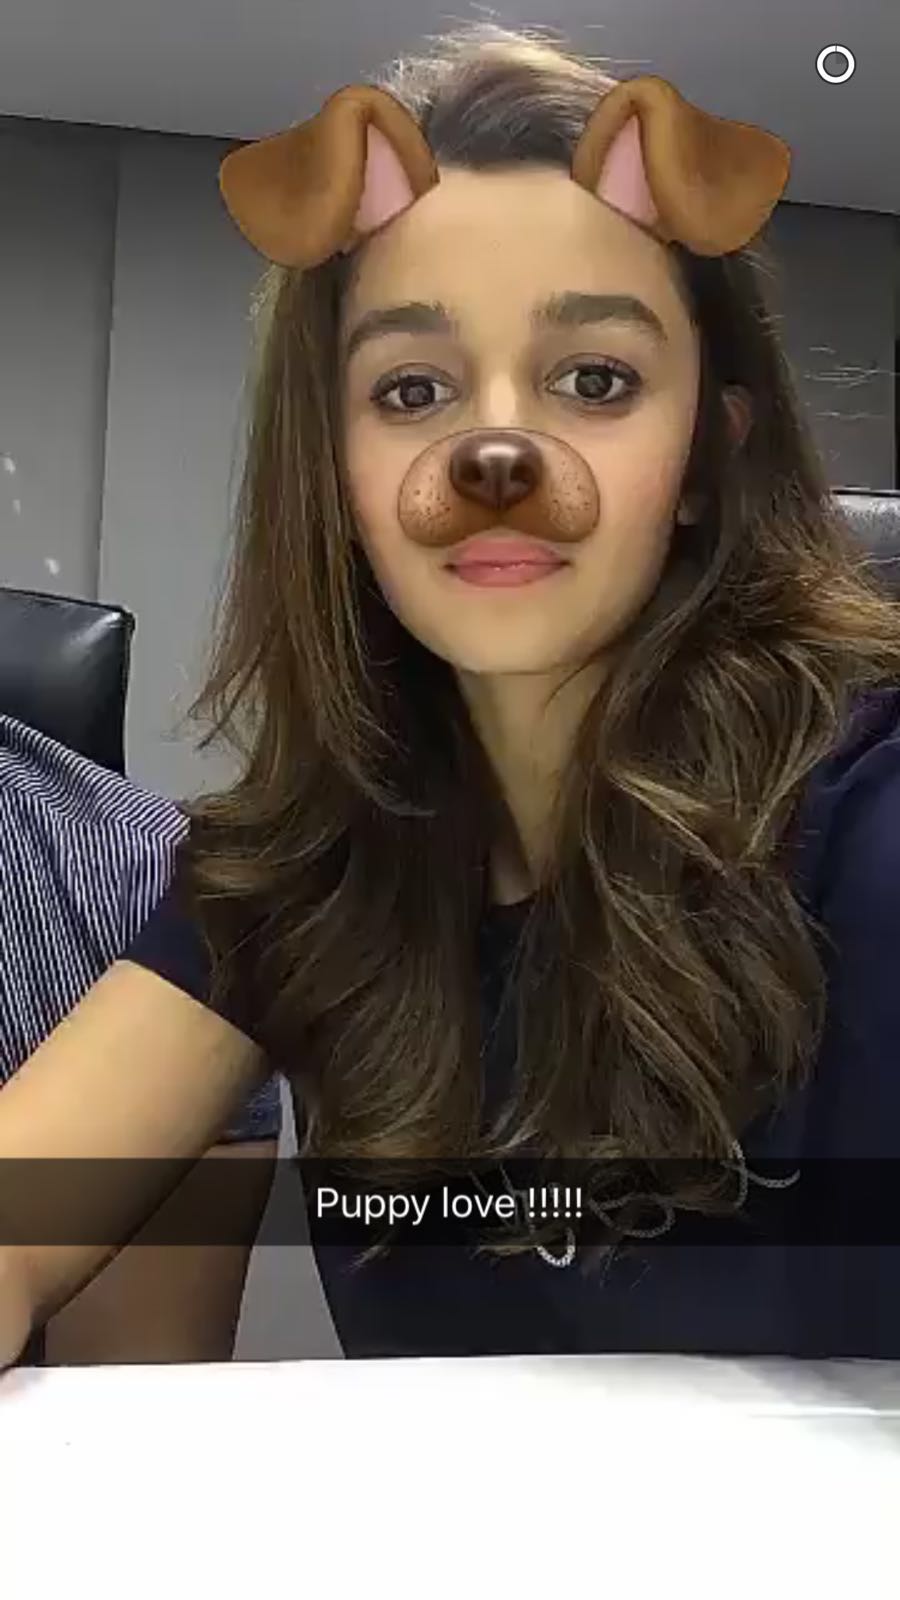 In Photos: Alia’s Puppy Face And Sidharth & Fawad Face-Swapping Is What You Have To See Today!